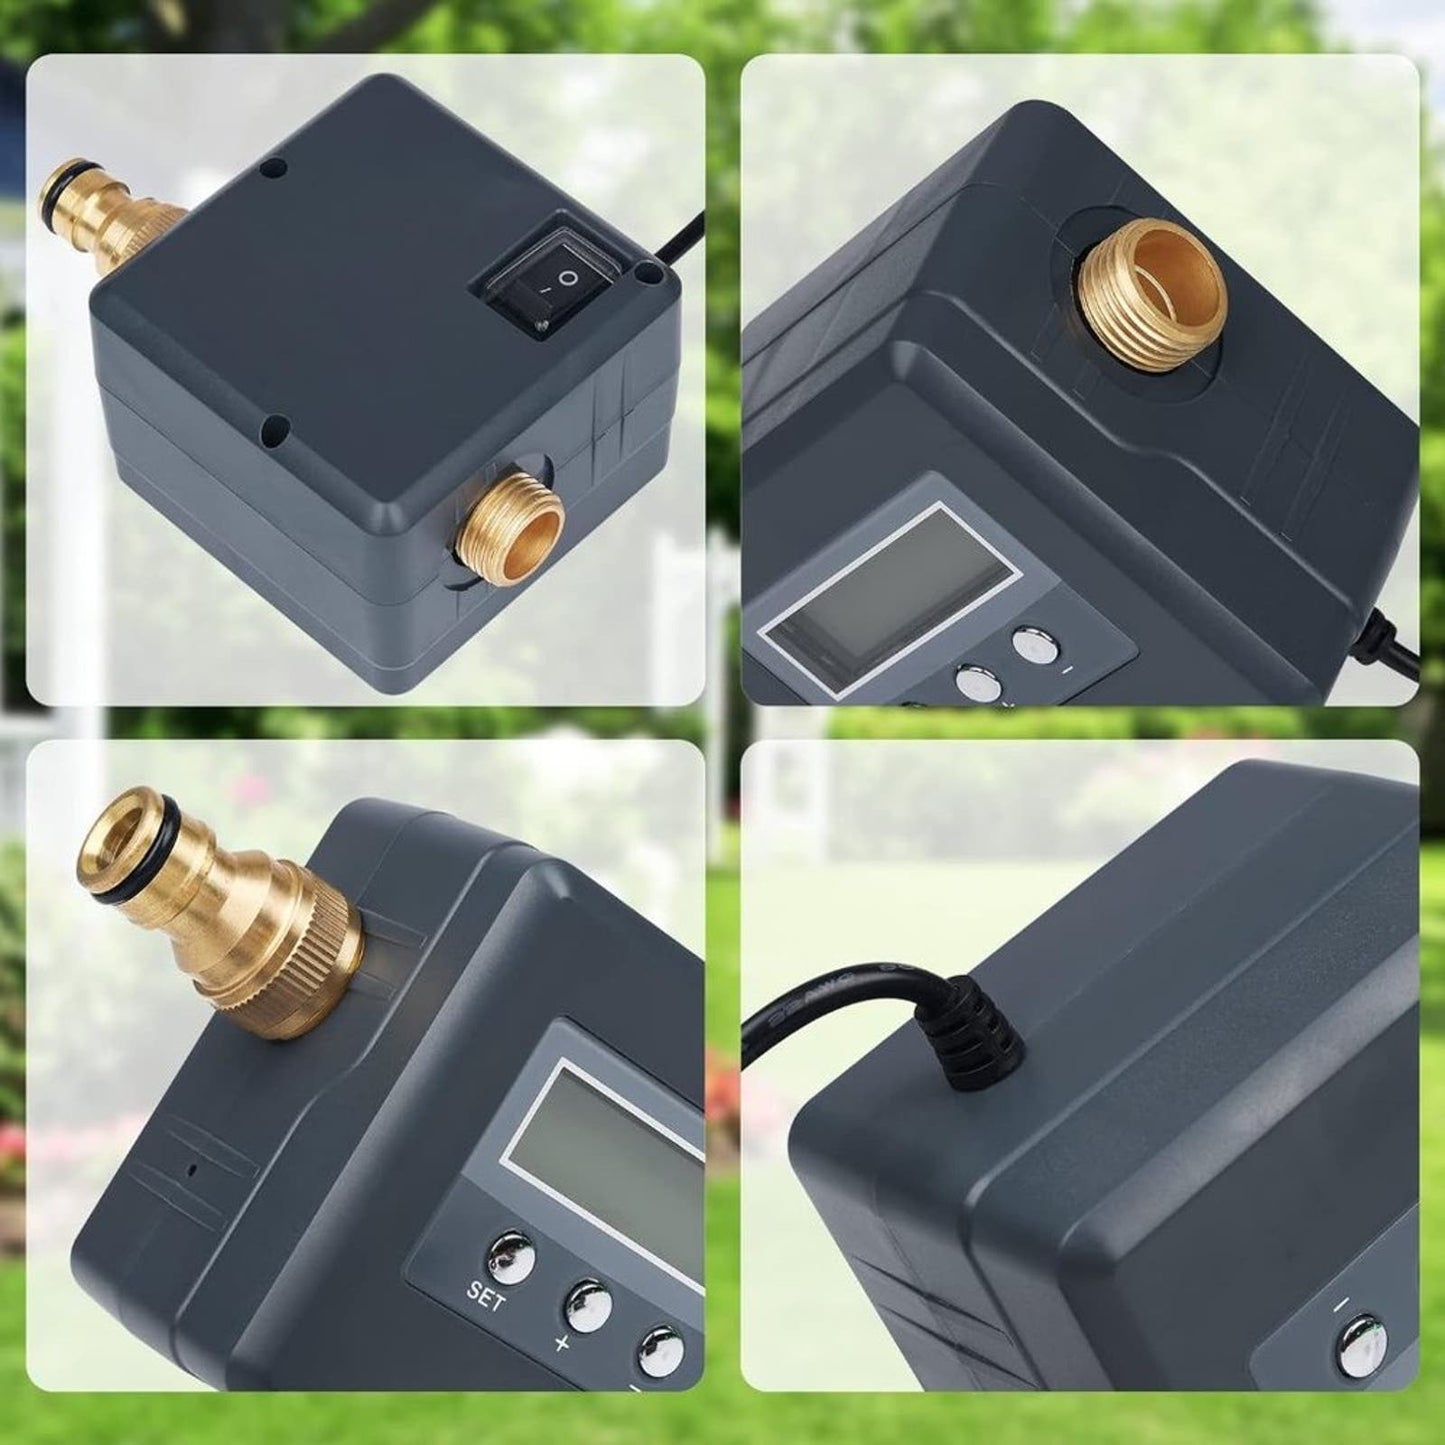 DAOTAILI Sprinkler Timer,Hose Timer with Timing and Frequency Irrigation Garden